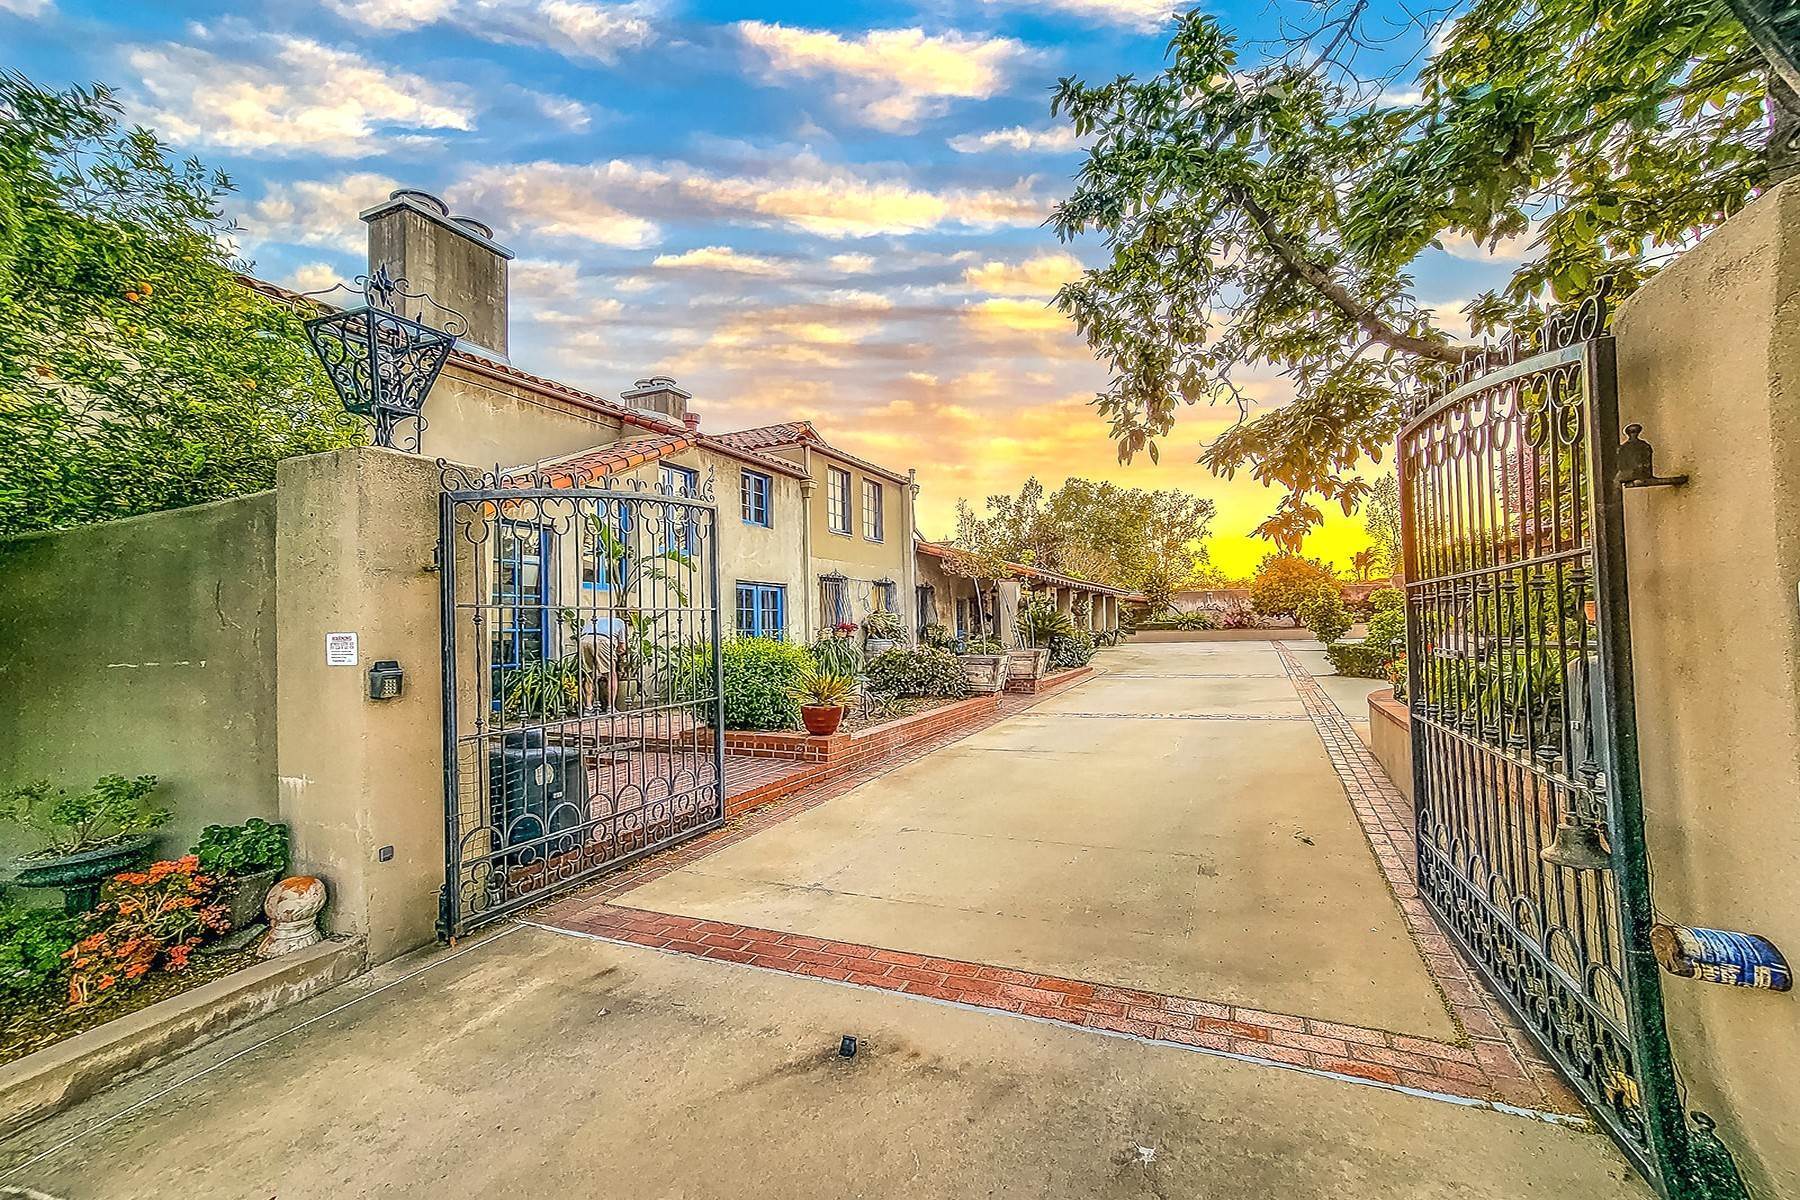 Single Family Homes for Active at 805 W. 16th Street, Upland, CA 91784 805 W. 16th Street Upland, California 91784 United States